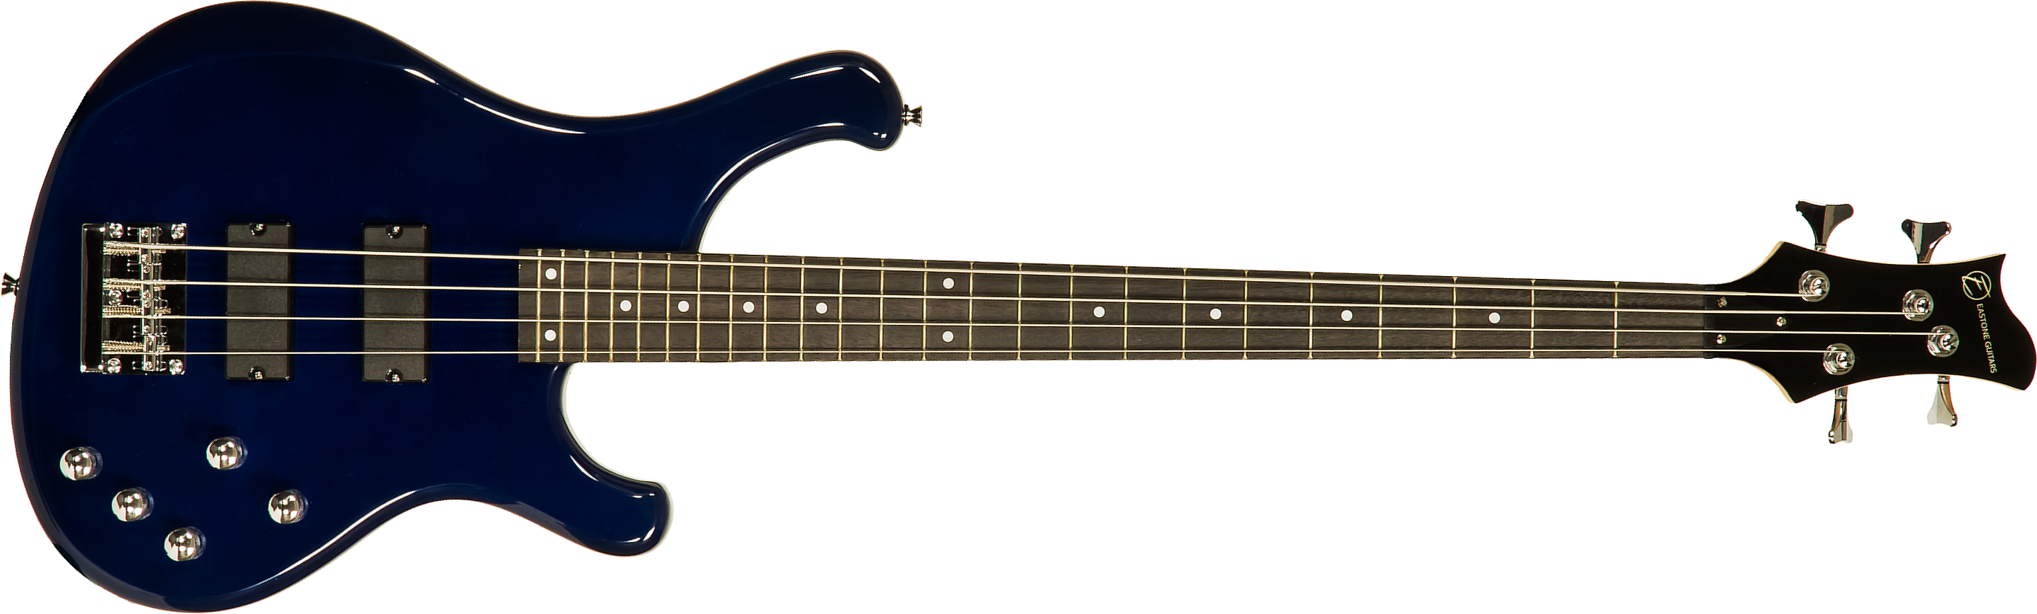 Eastone Rb Active Ama - Blue - Solidbody E-bass - Main picture